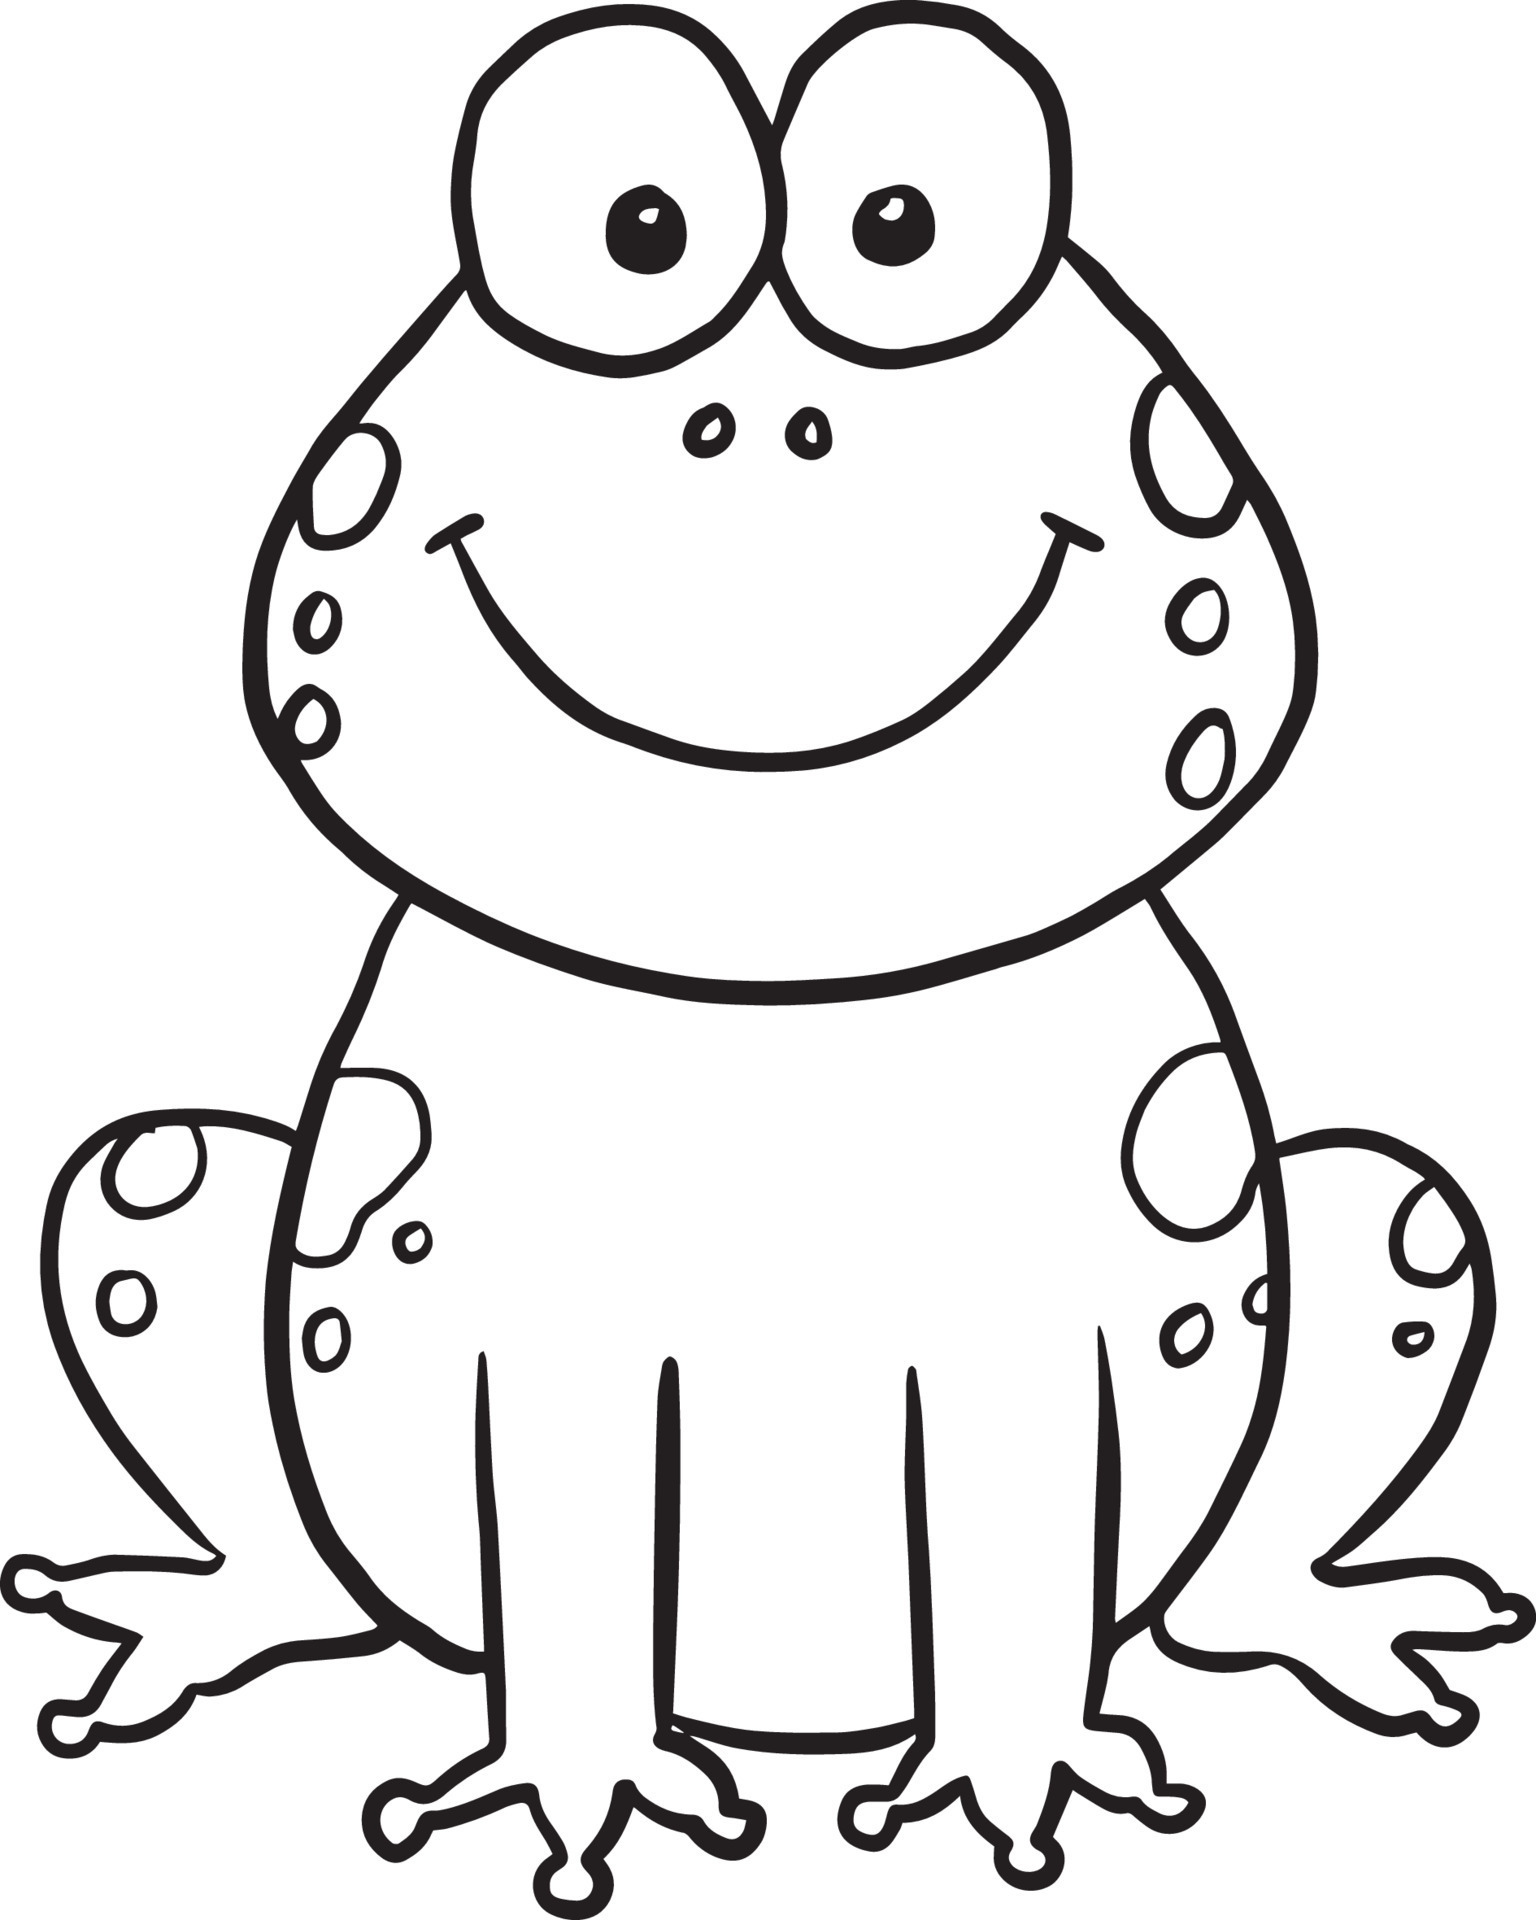 Frog Anime PNG Picture Animal Frog Cute Frog Clipart Green Frog PNG  Image For Free Download